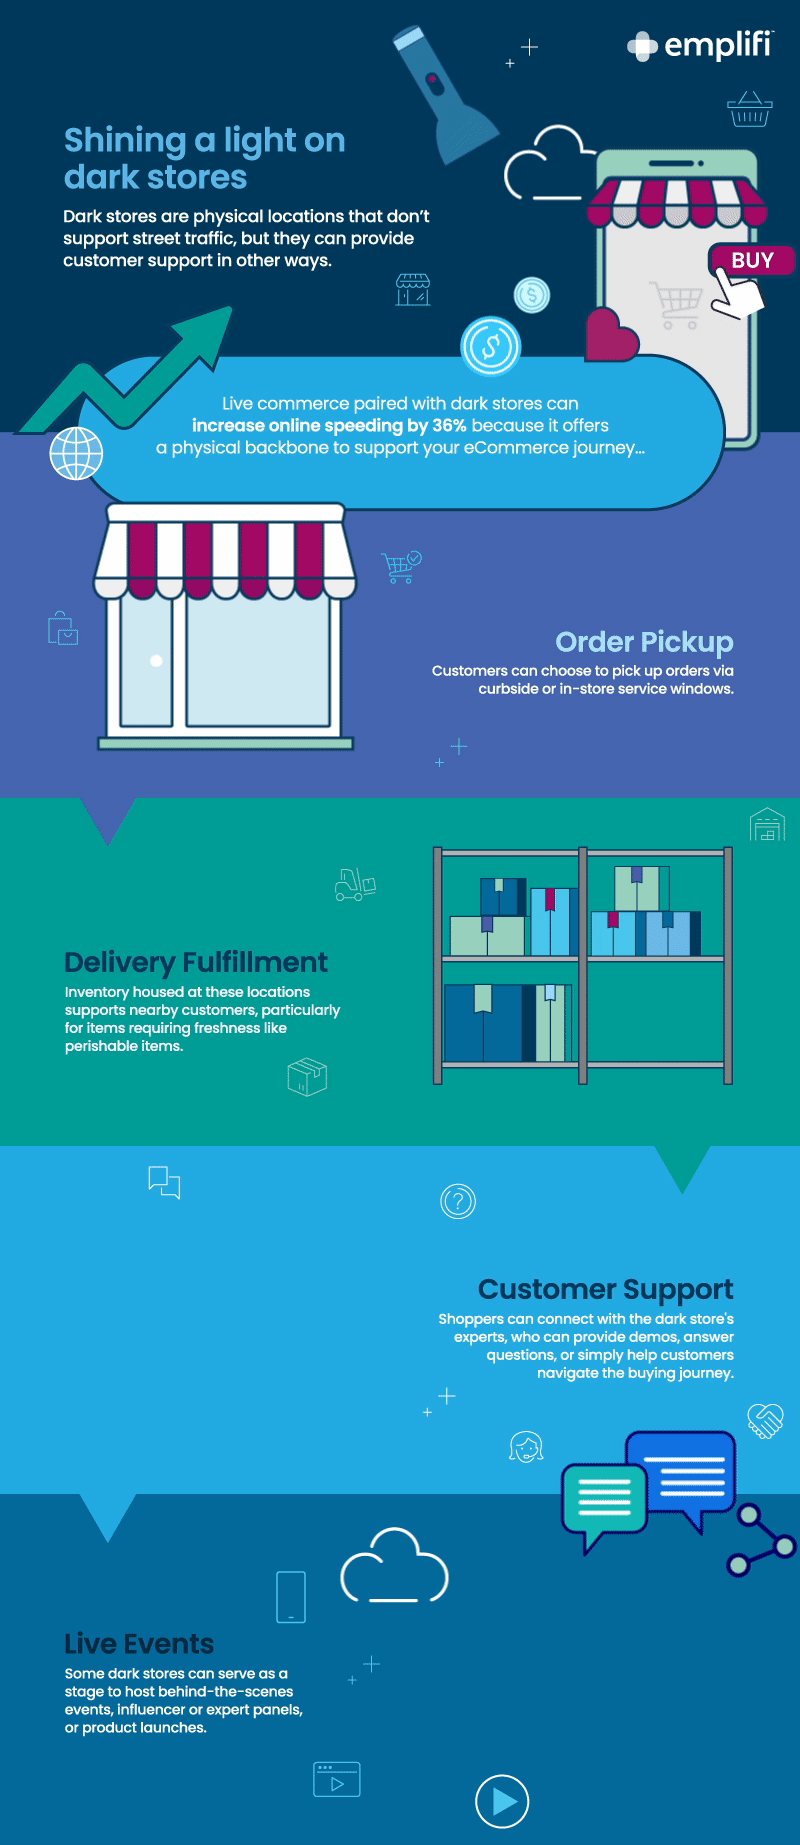 Dark stores can support live commerce in across the customer journey.